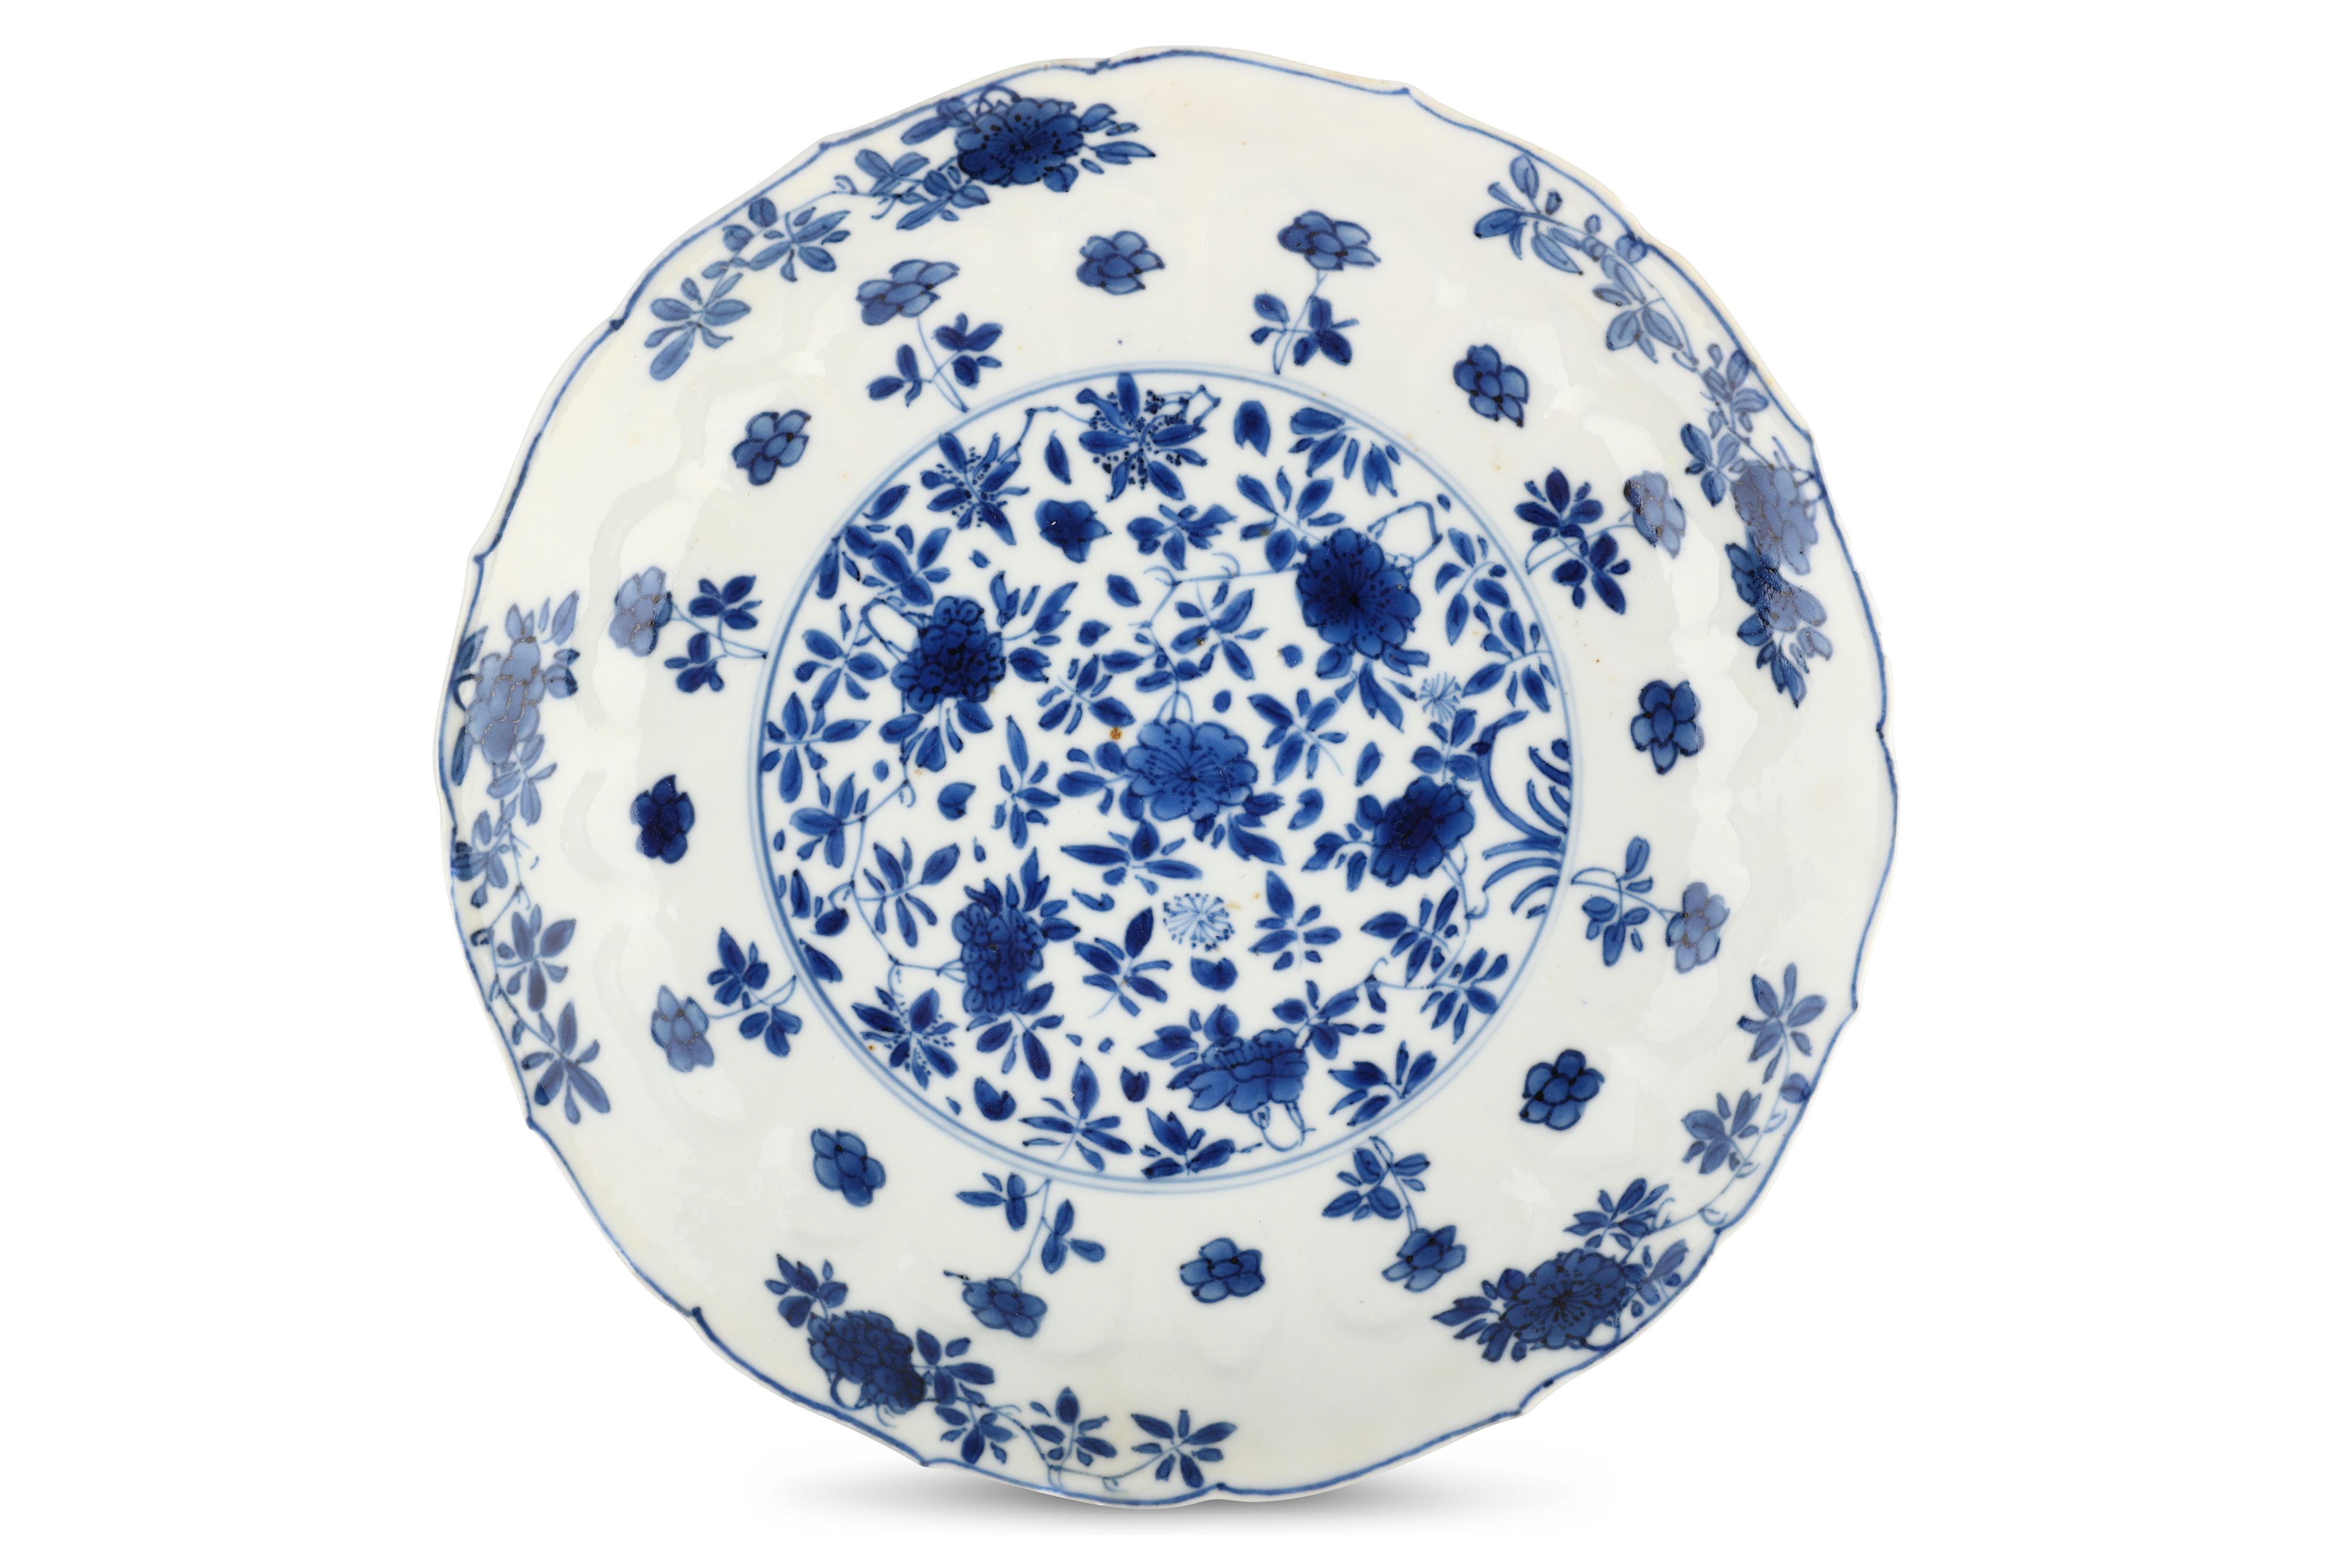 A CHINESE BLUE AND WHITE 'FLOWERS' MOULDED DISH. Kangxi mark and of the period. Decorated with a